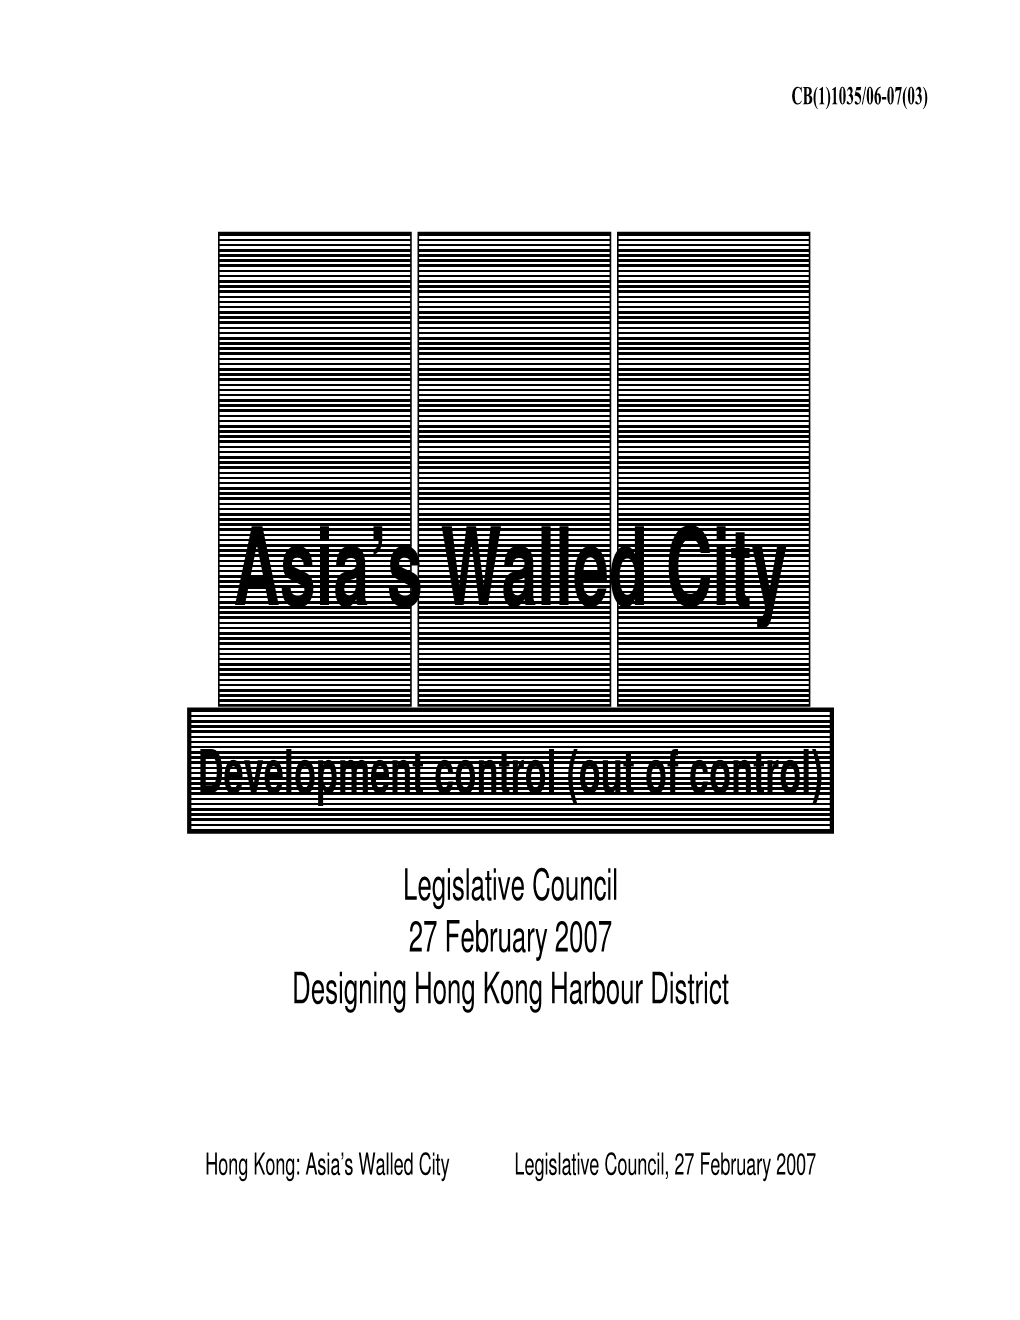 Asia's Walled City